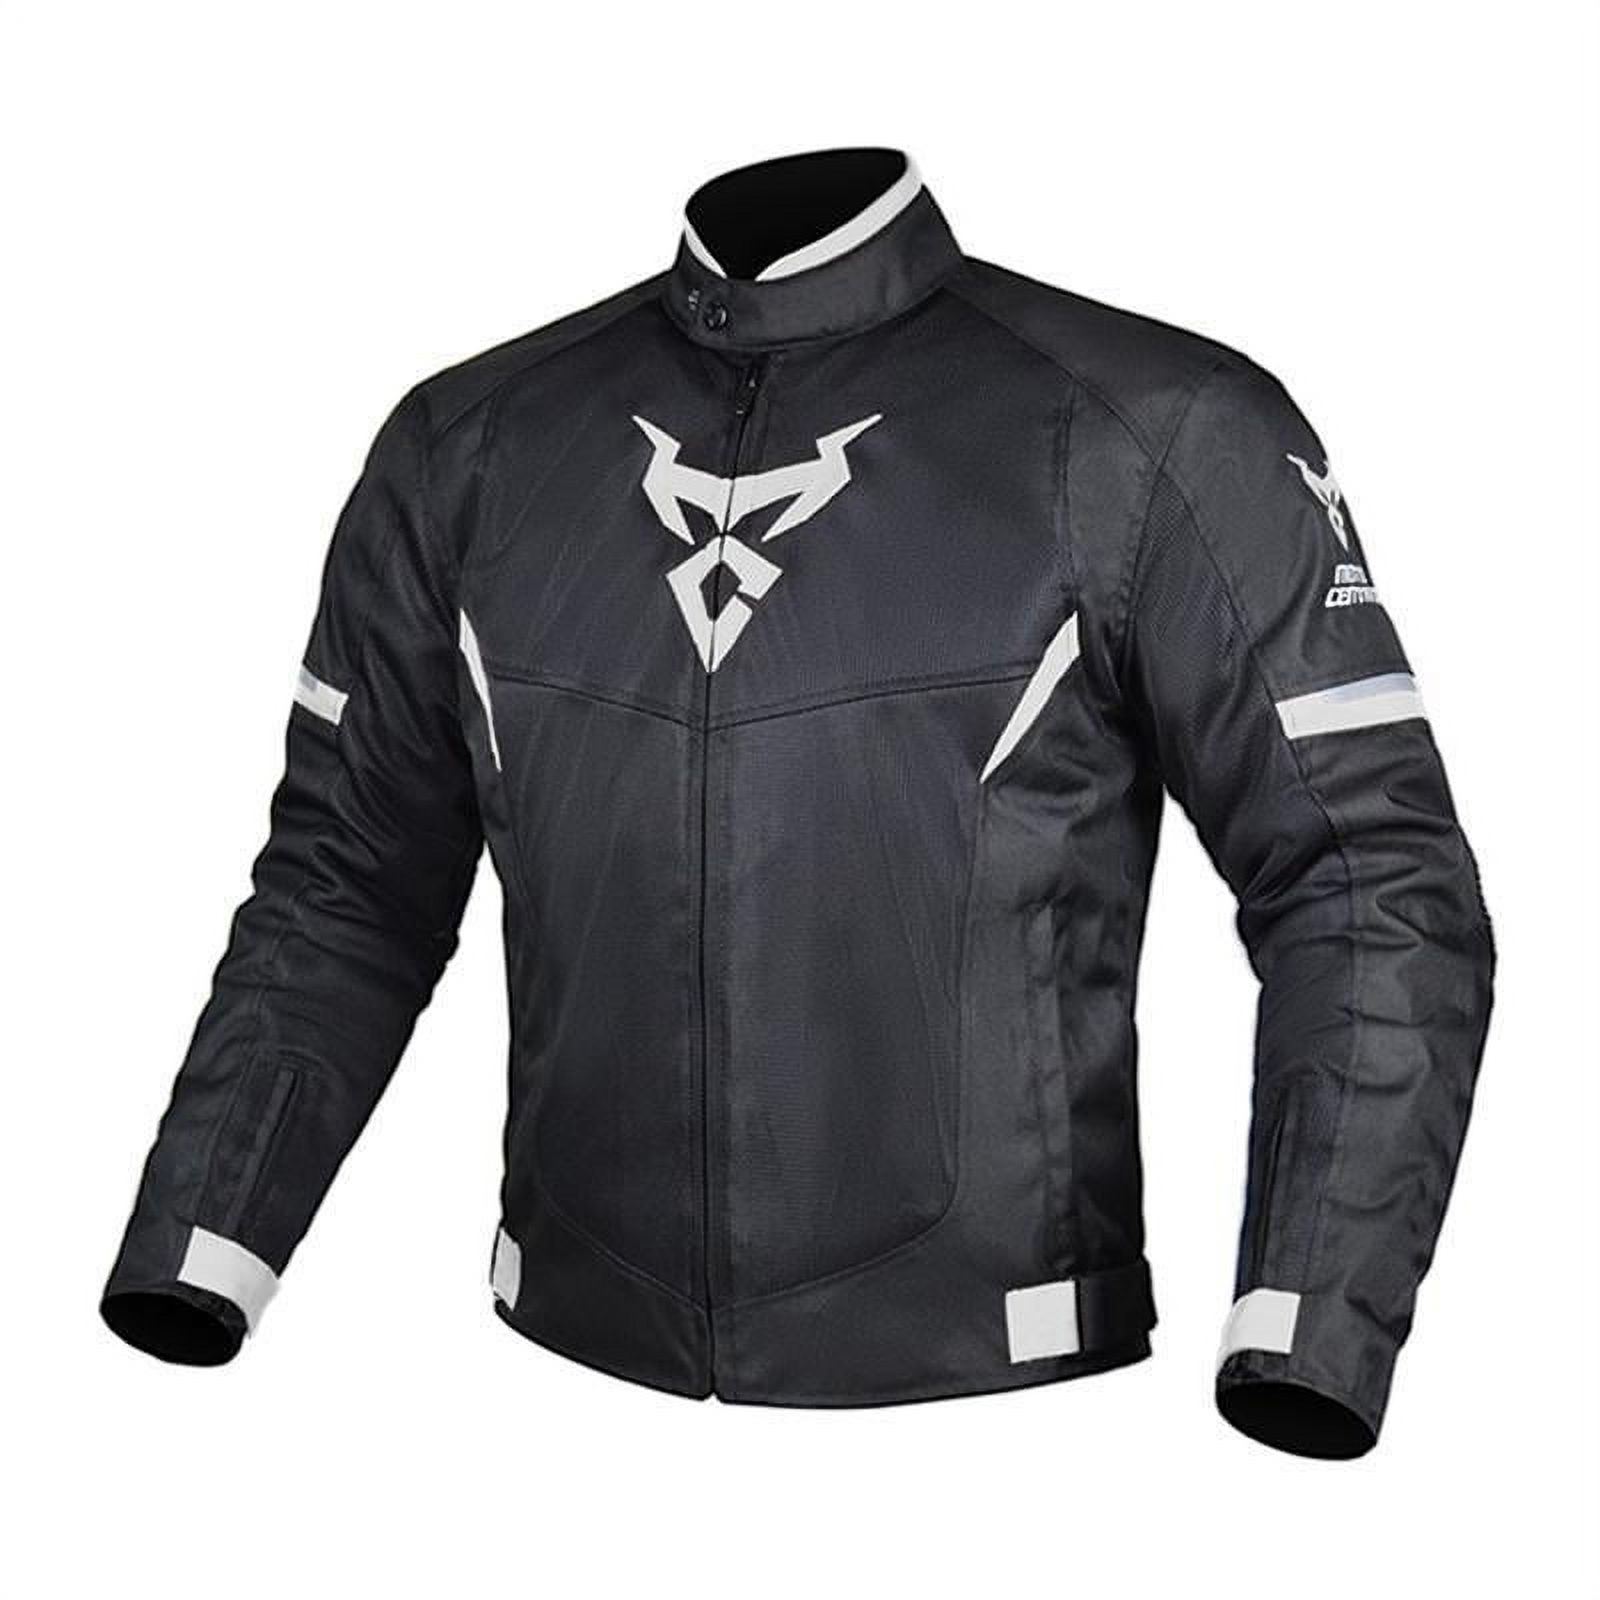 Motorcycle for Jacket Summer Mesh Breathable Racing Anti-drop for Jacket Riding - image 1 of 19